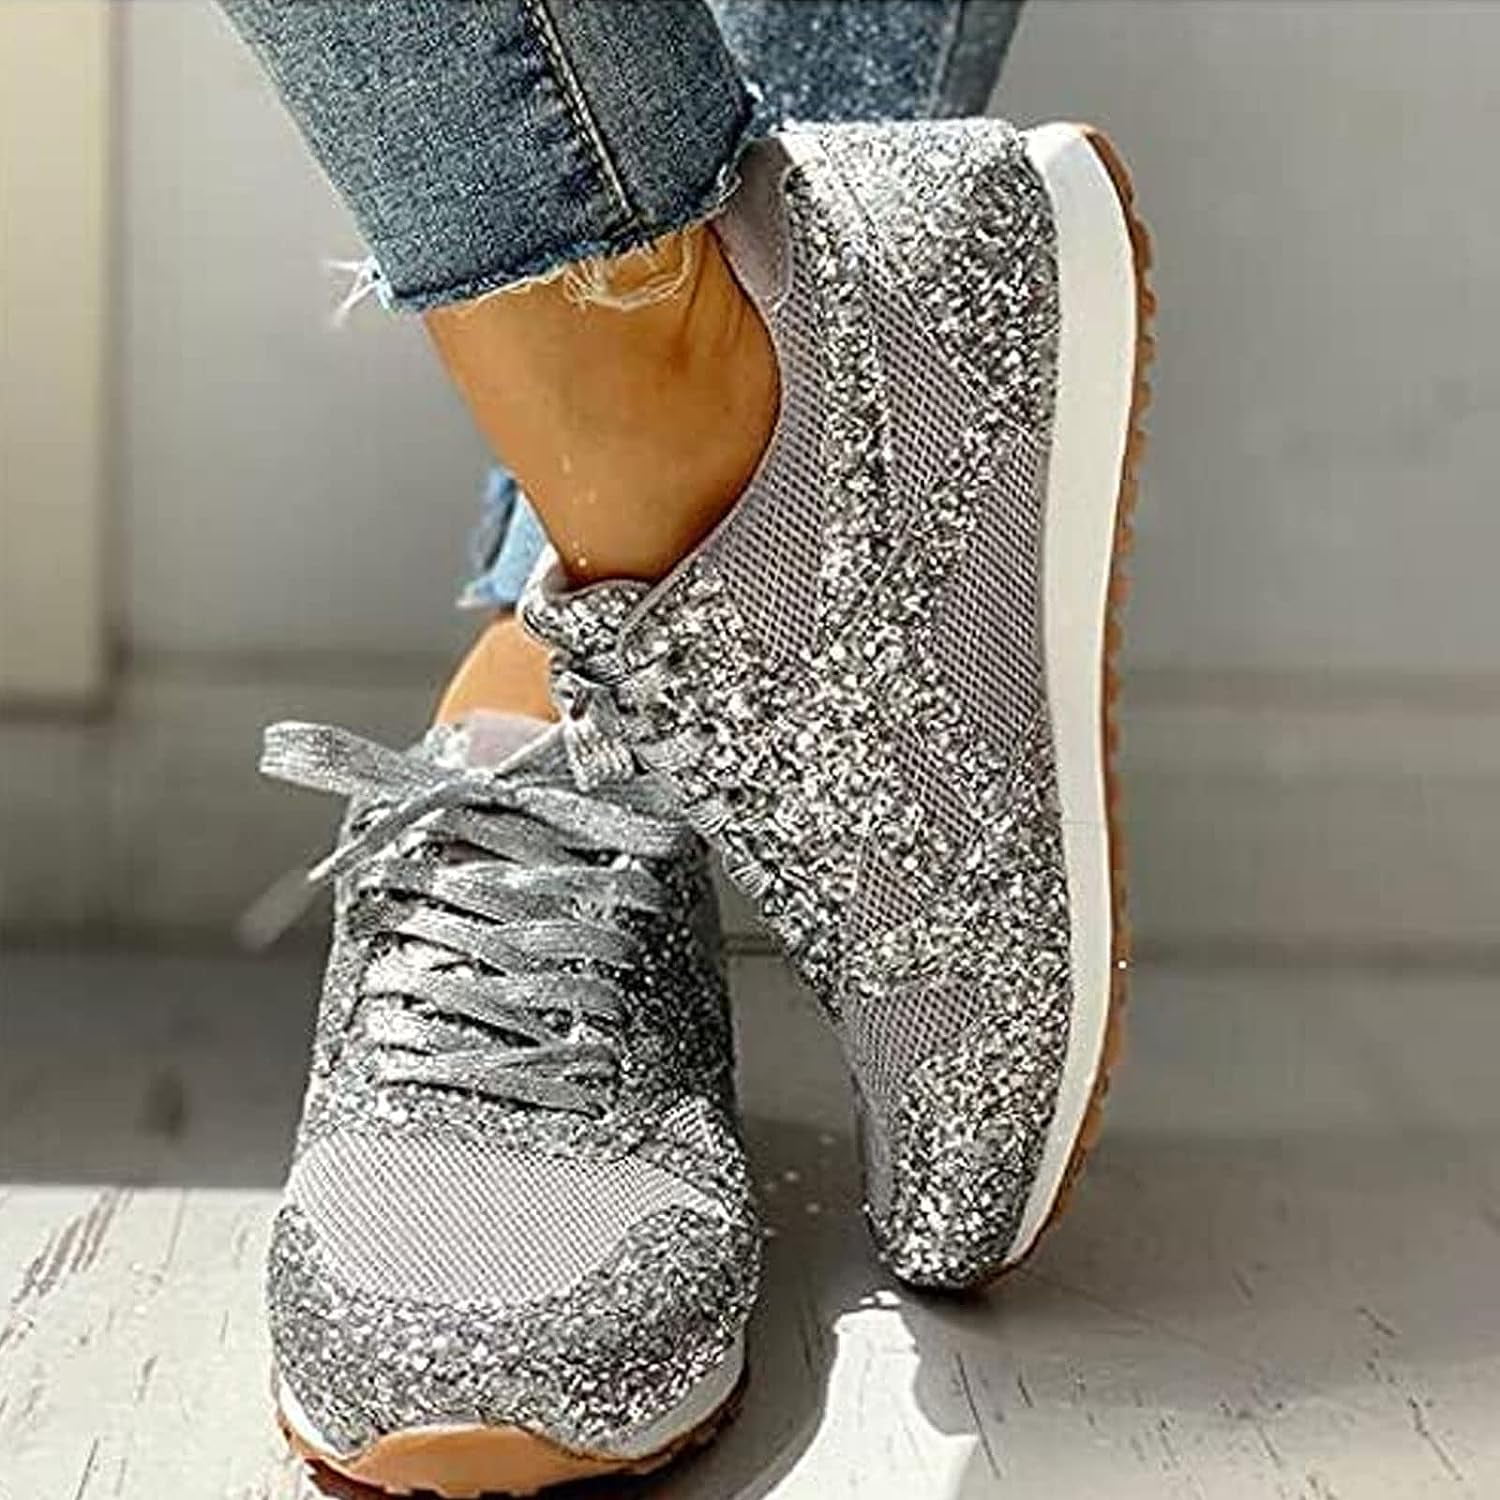 W1412 Women Fashion Sequin Sparkle Lace Up Tennis Sneakers Athletic Shoes  Flats